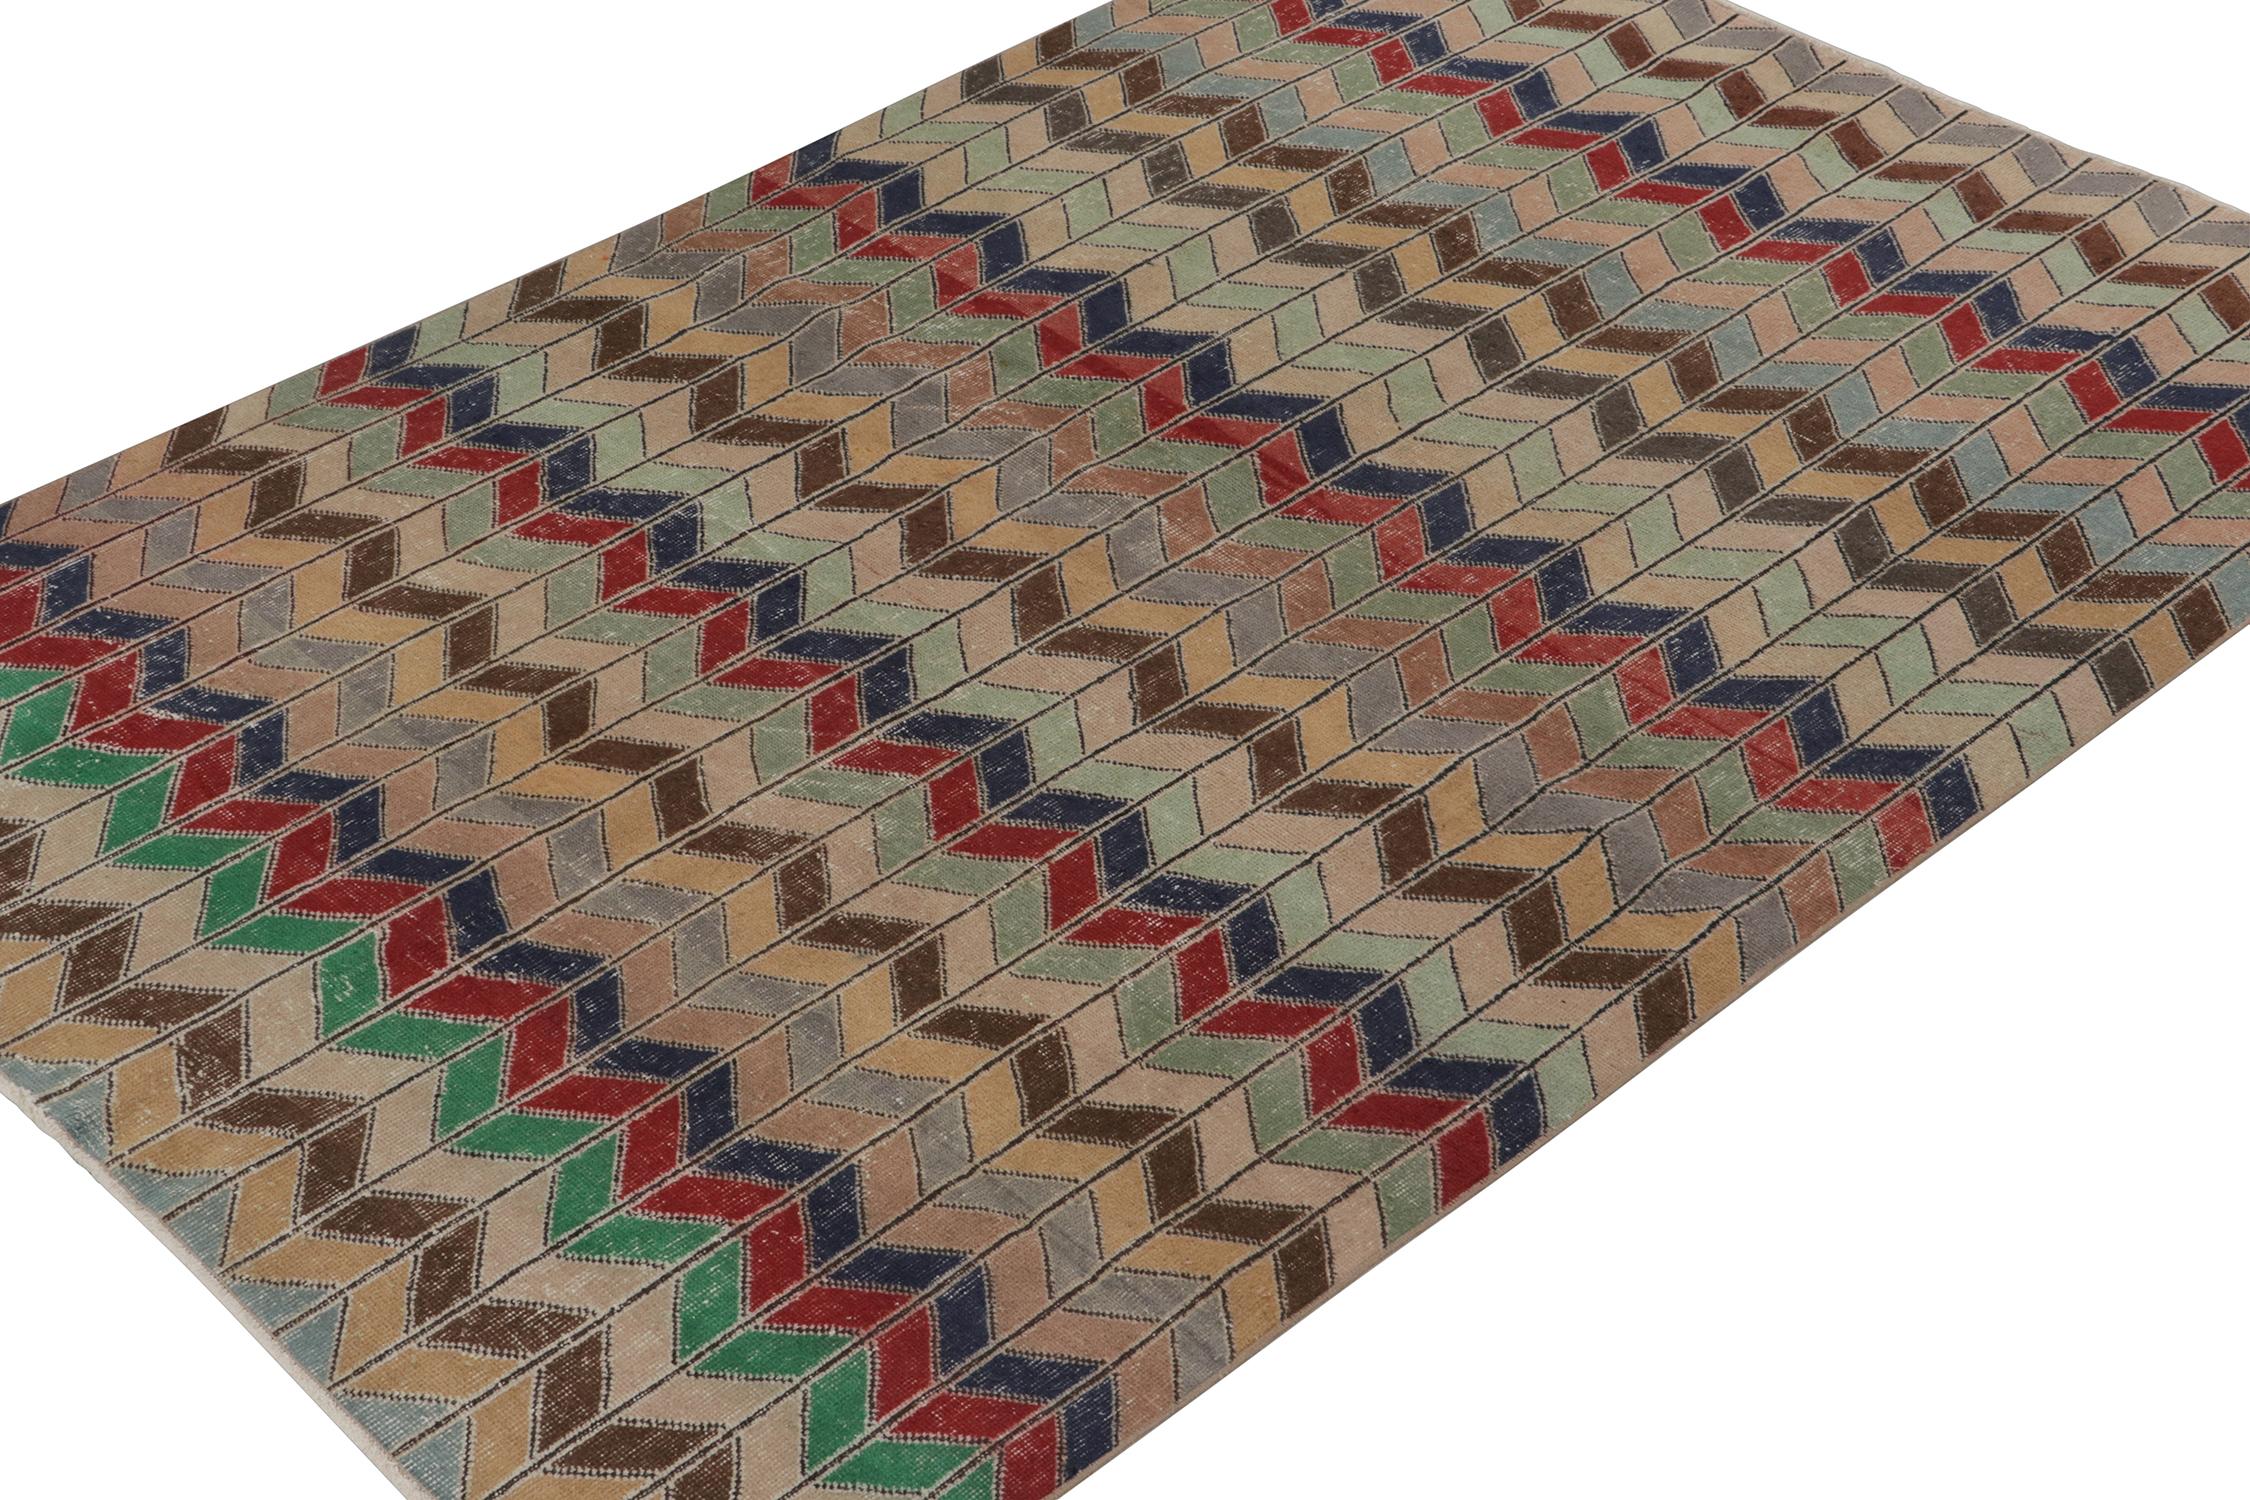 A vintage 6x9 rug from an innovative Turkish atelier, entering Rug & Kilim’s commemorative Mid-Century Pasha Collection.
Further on the Design:
This industrial art Deco piece enjoys a dextrous geometric pattern alternating in polychromatic